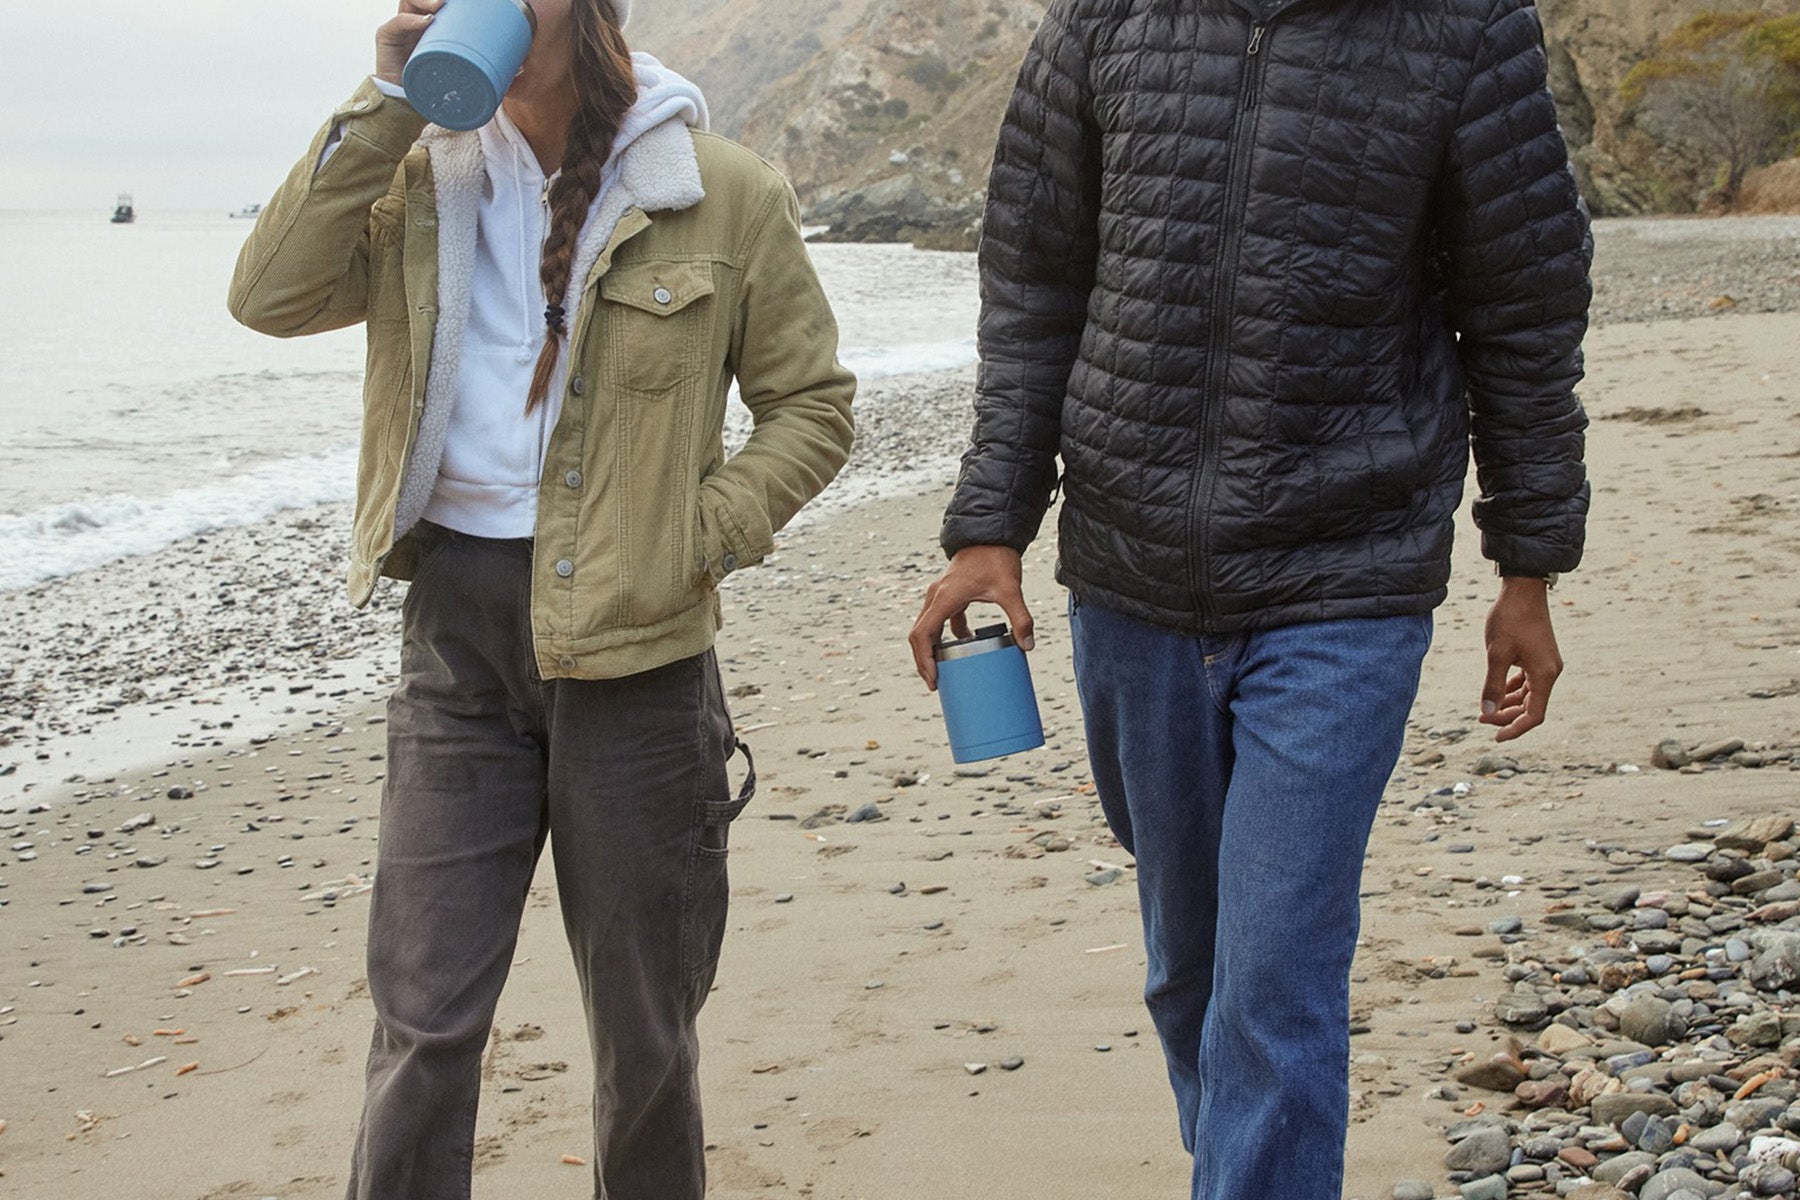 Couple walking on the beach while drinking from RTIC lowball tumbler in blue